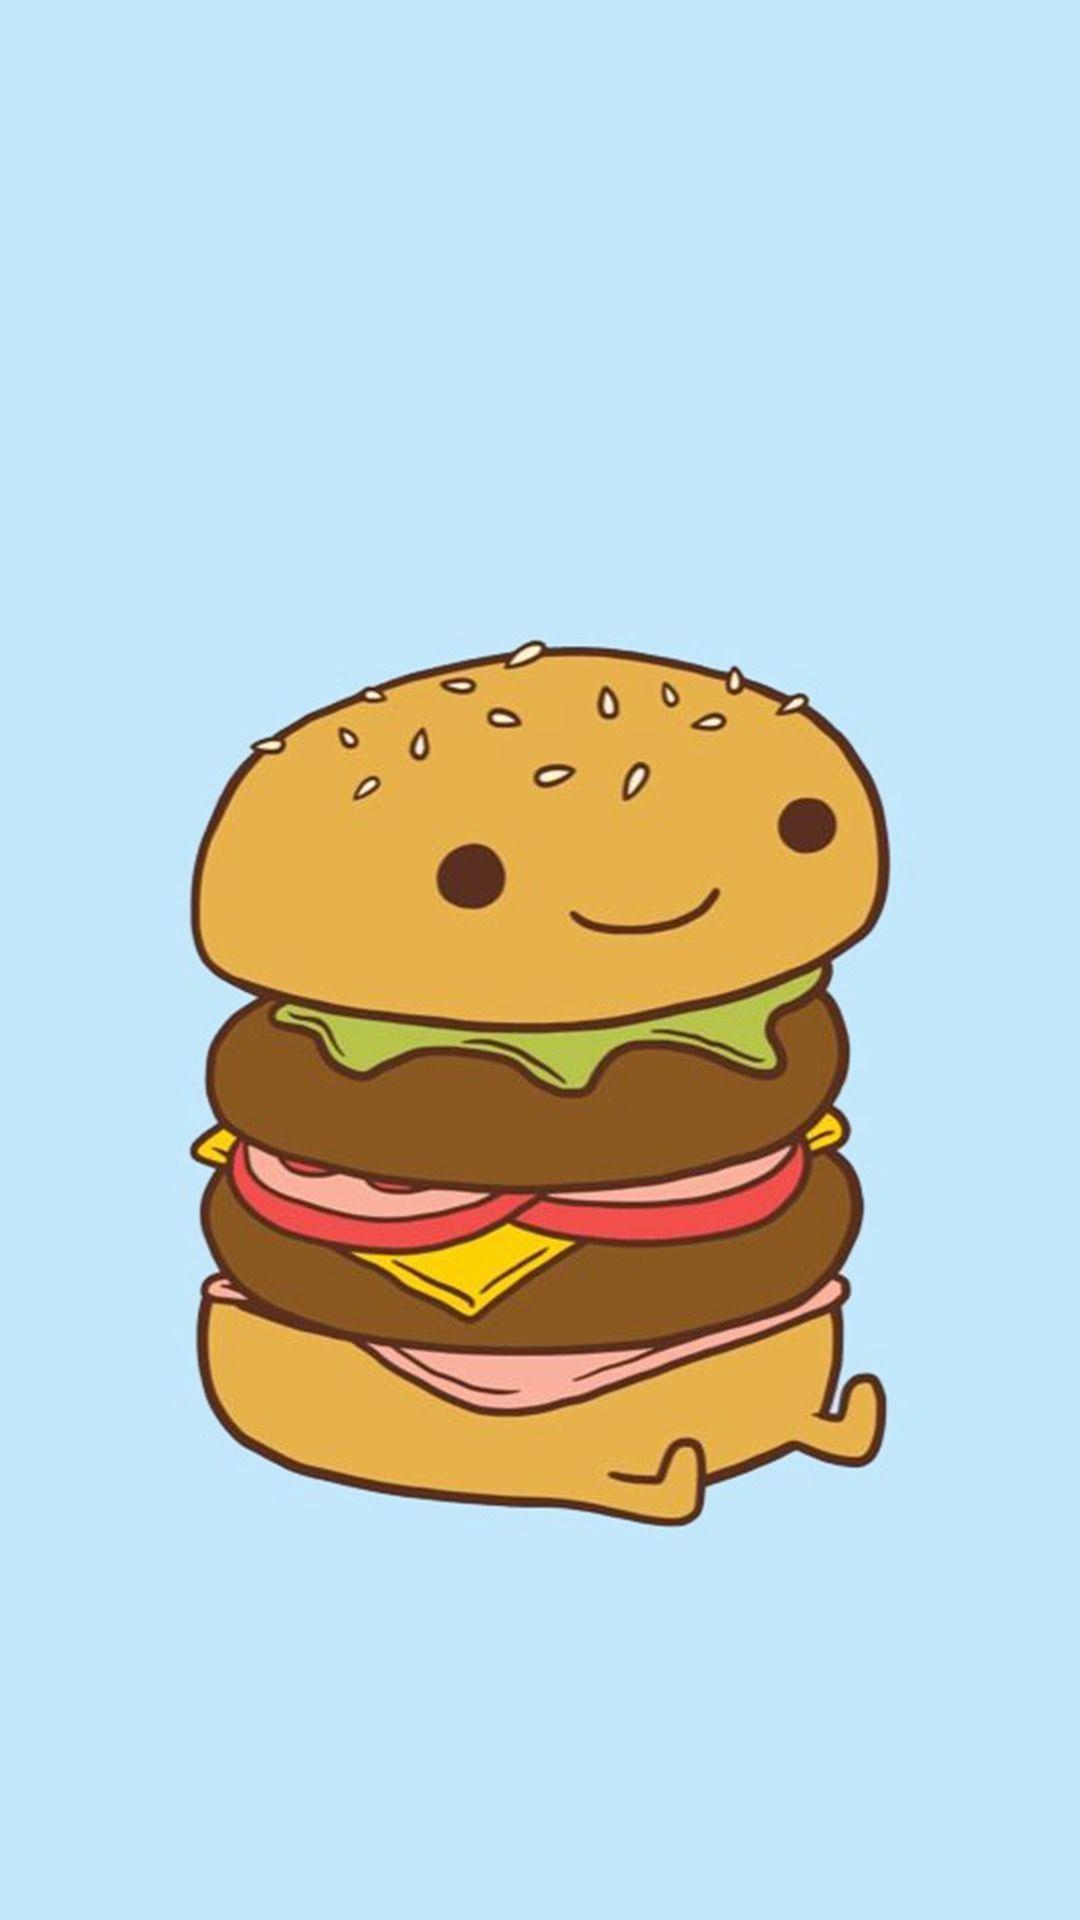 Cheeseburger wallpapers HD | Download Free backgrounds